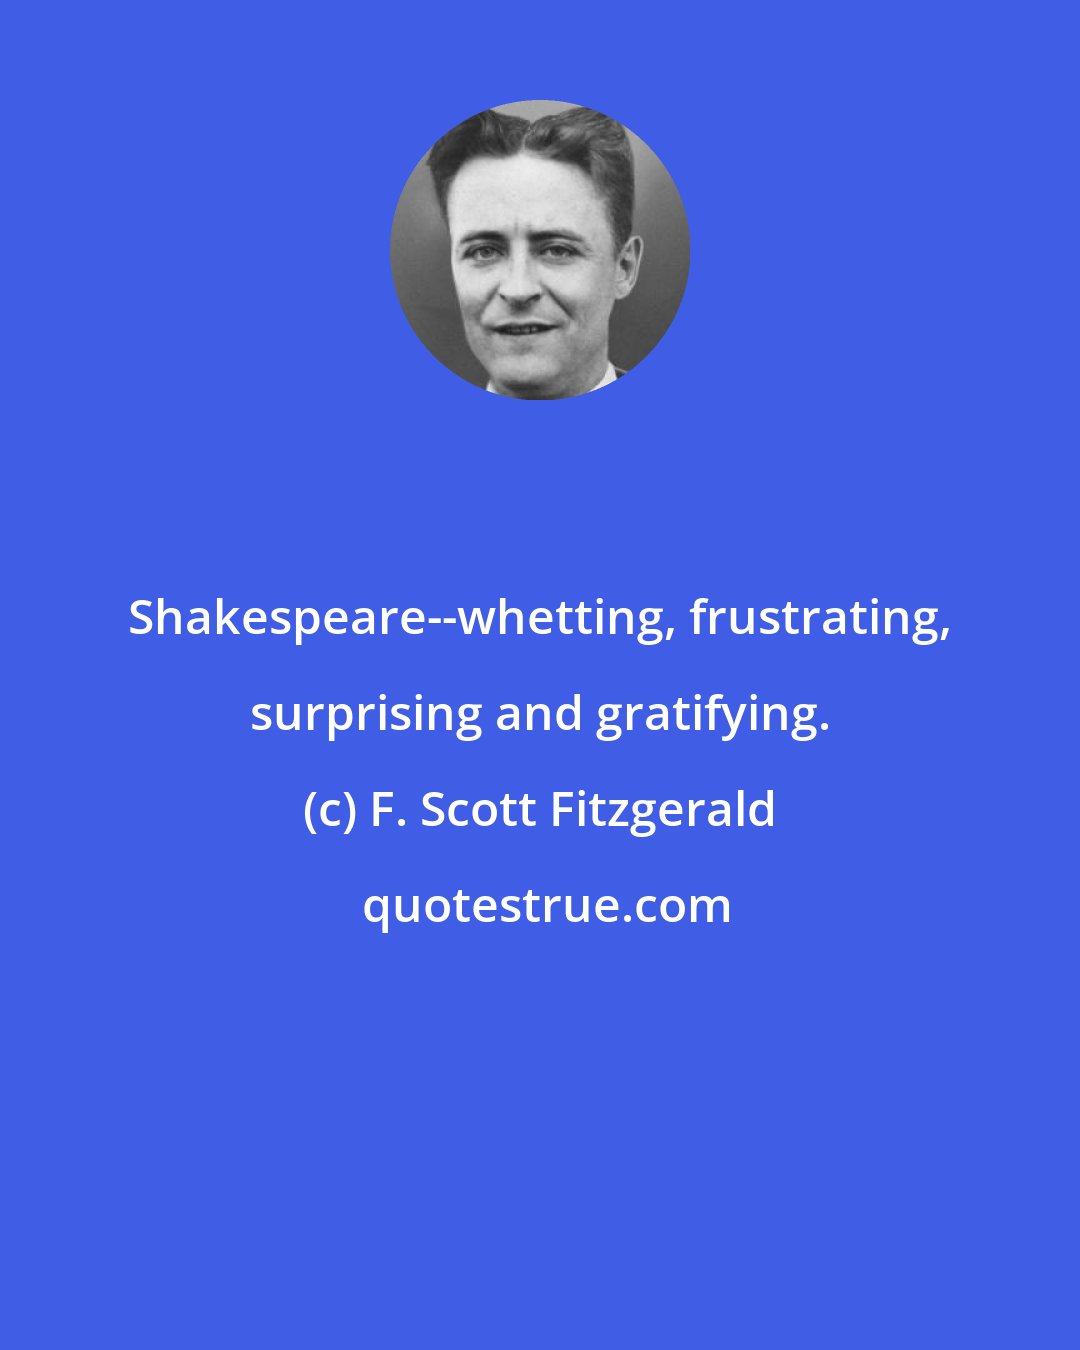 F. Scott Fitzgerald: Shakespeare--whetting, frustrating, surprising and gratifying.